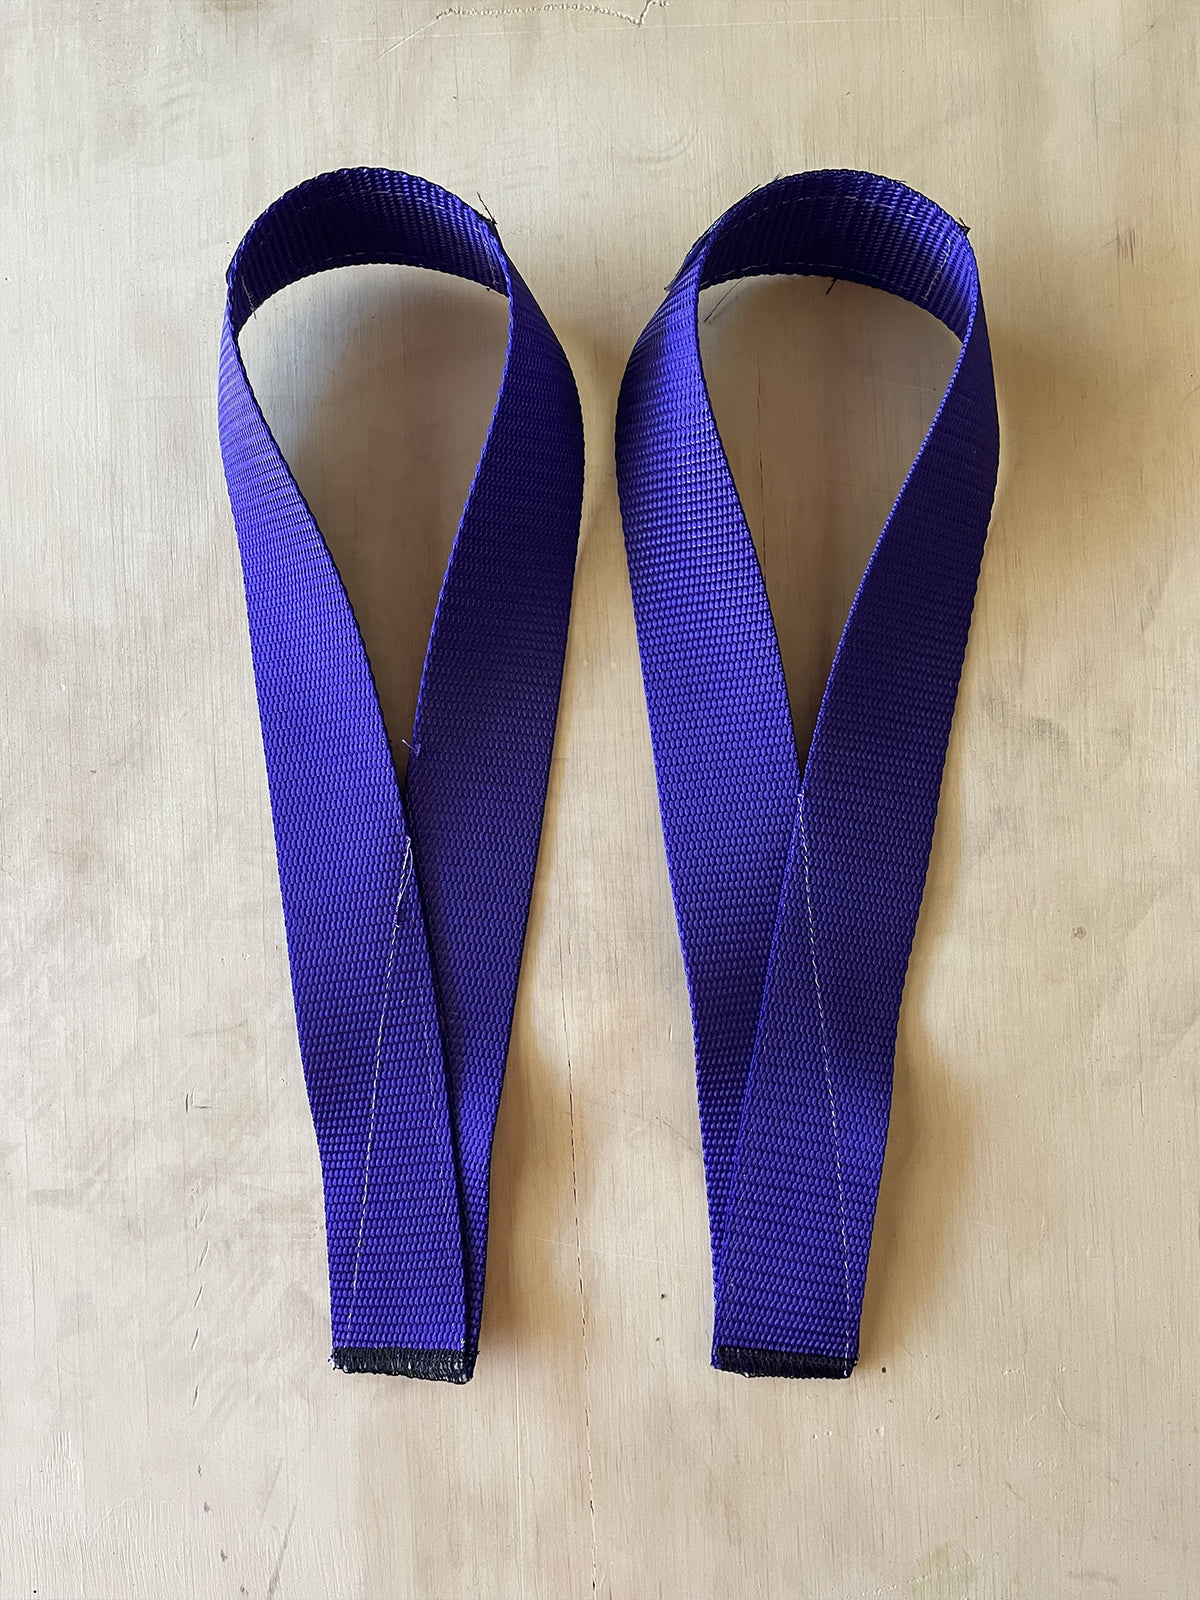 Purple Olympic Lifting Straps for Weightlifting